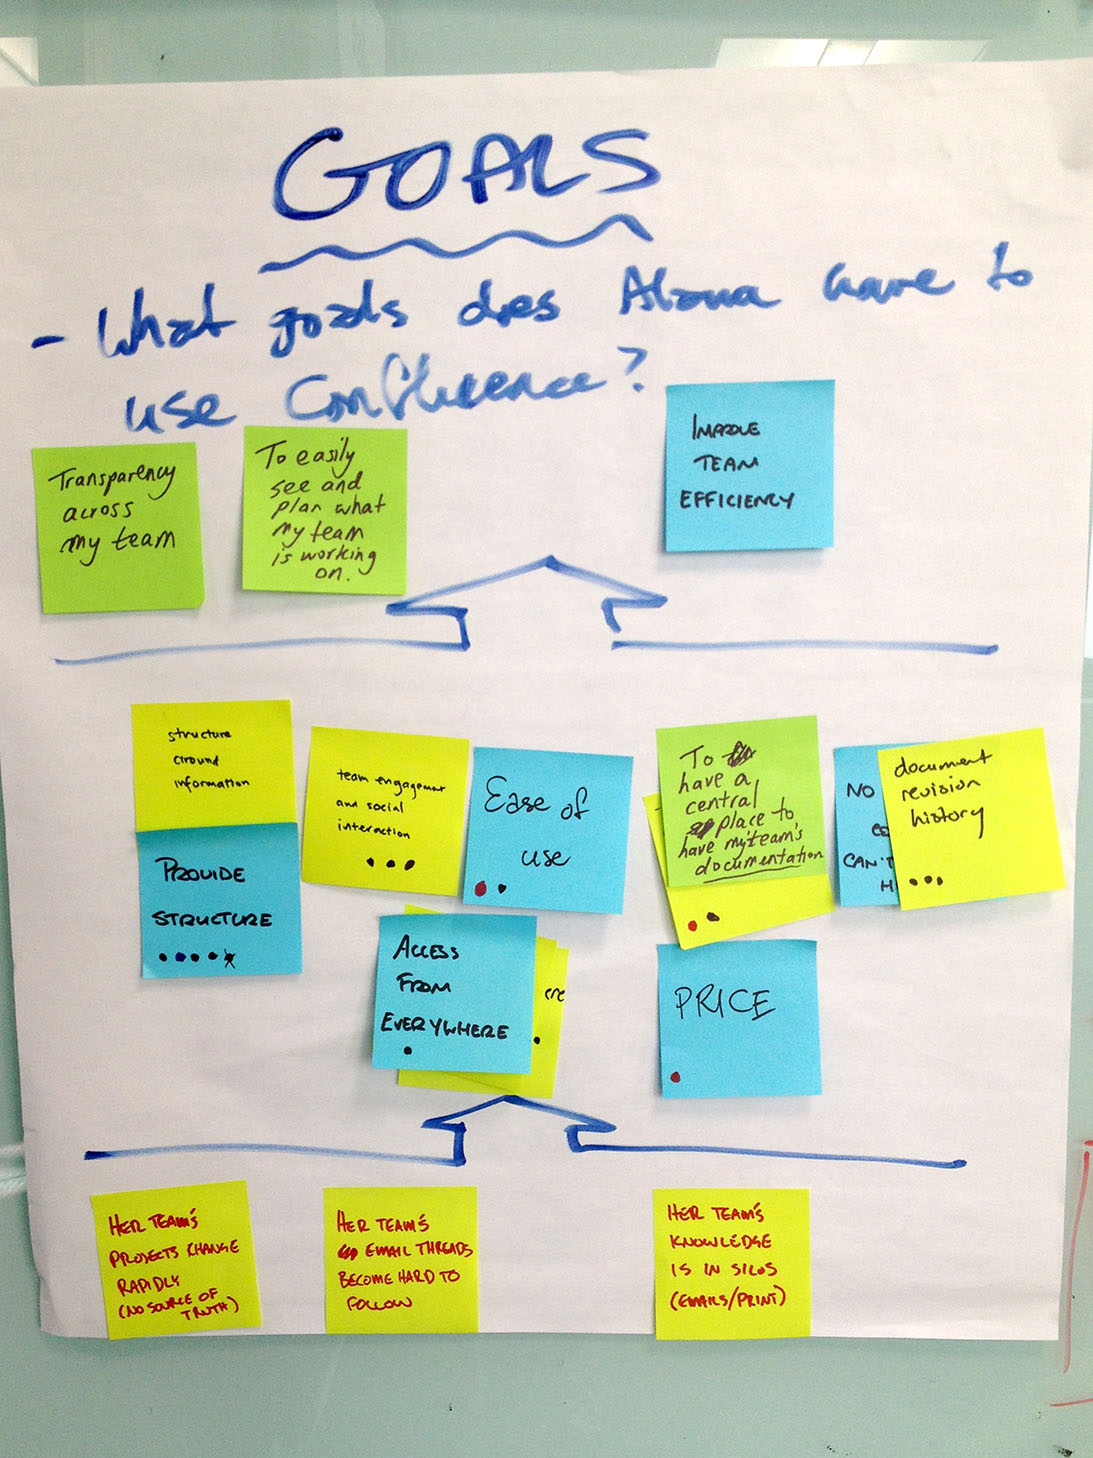 Creating the user's backstory is an important part of user journey mapping.